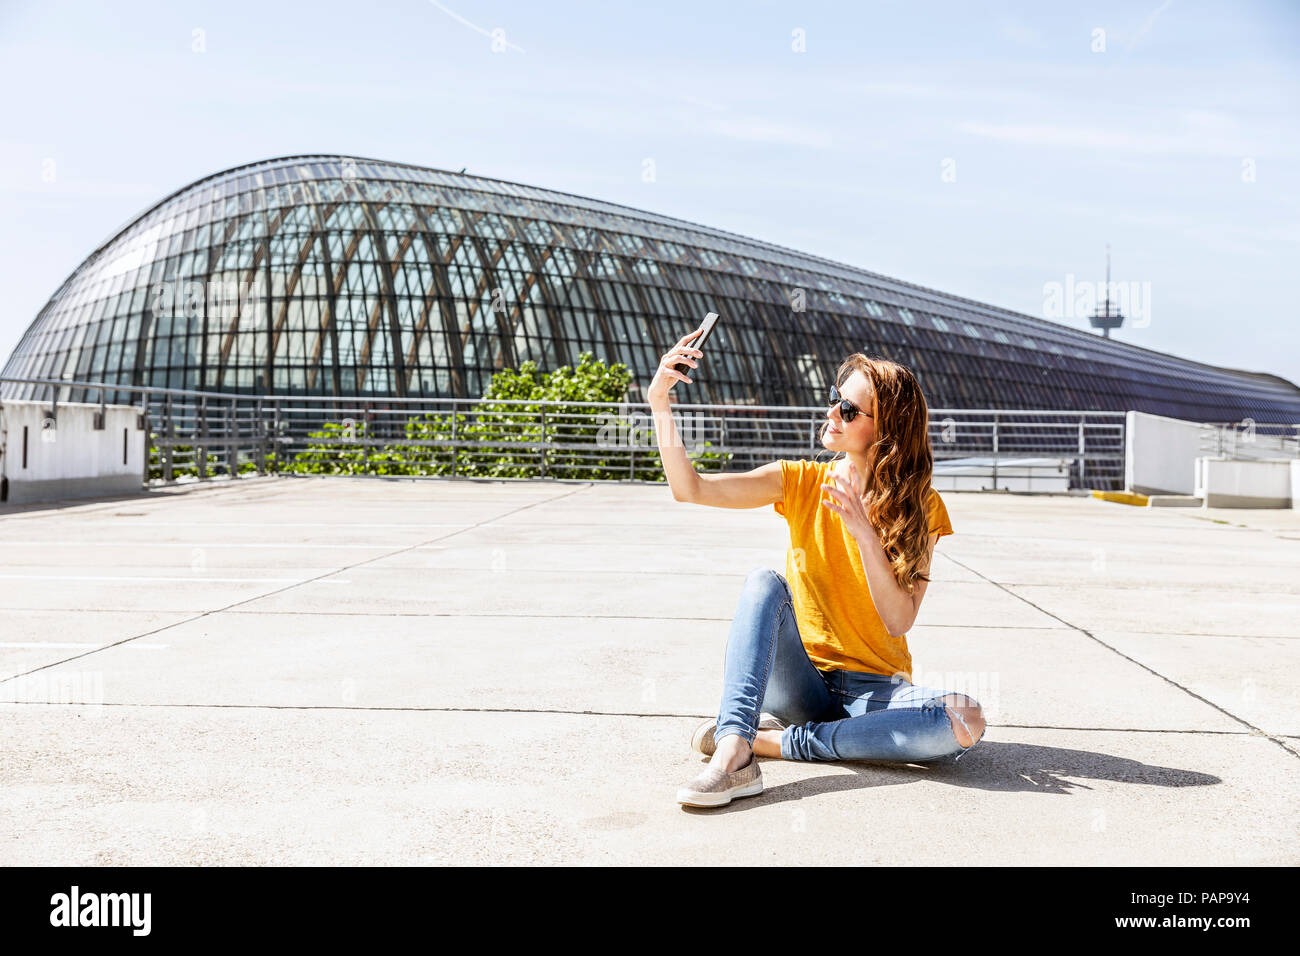 Germany, Cologne, smiling woman sitting on parking level taking selfie with smartphone Stock Photo